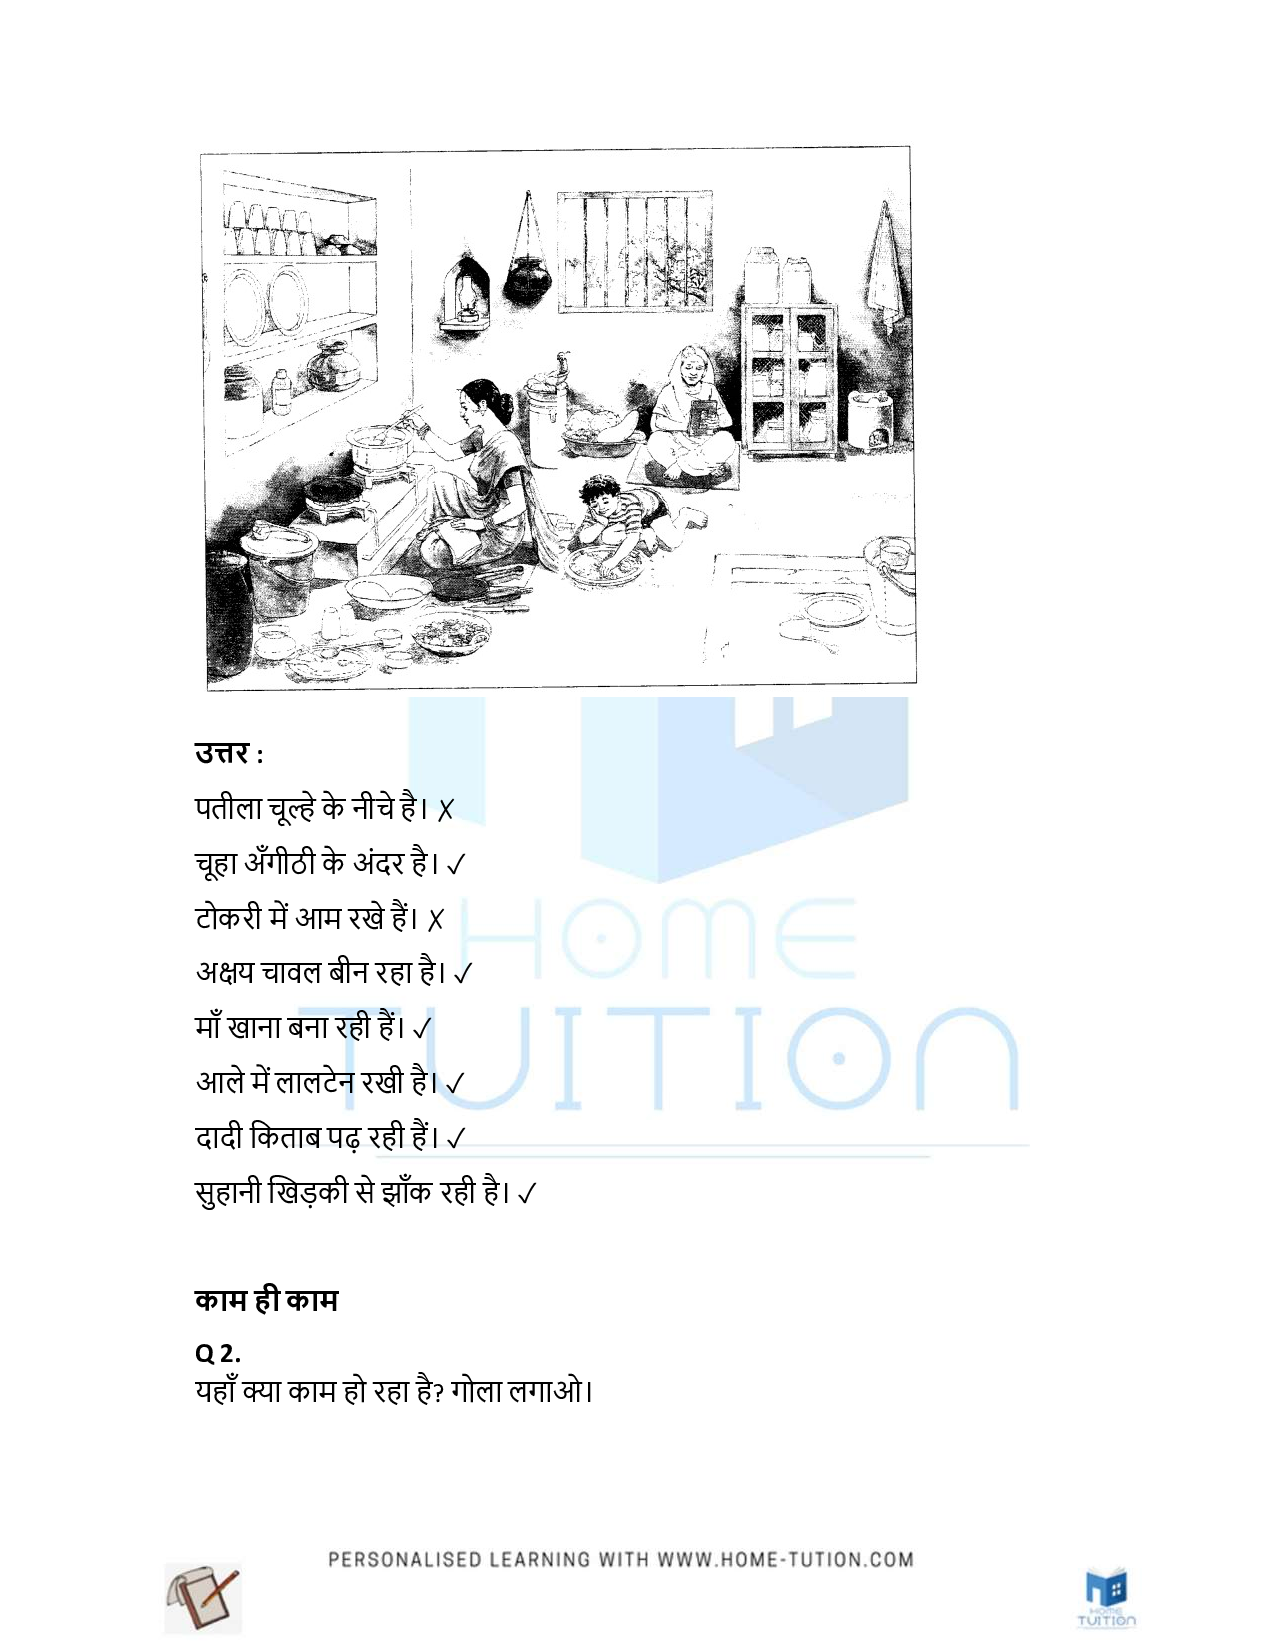 NCERT Solution for Class 1 Hindi Chapter 7 Rasoighar(रसोईघर)